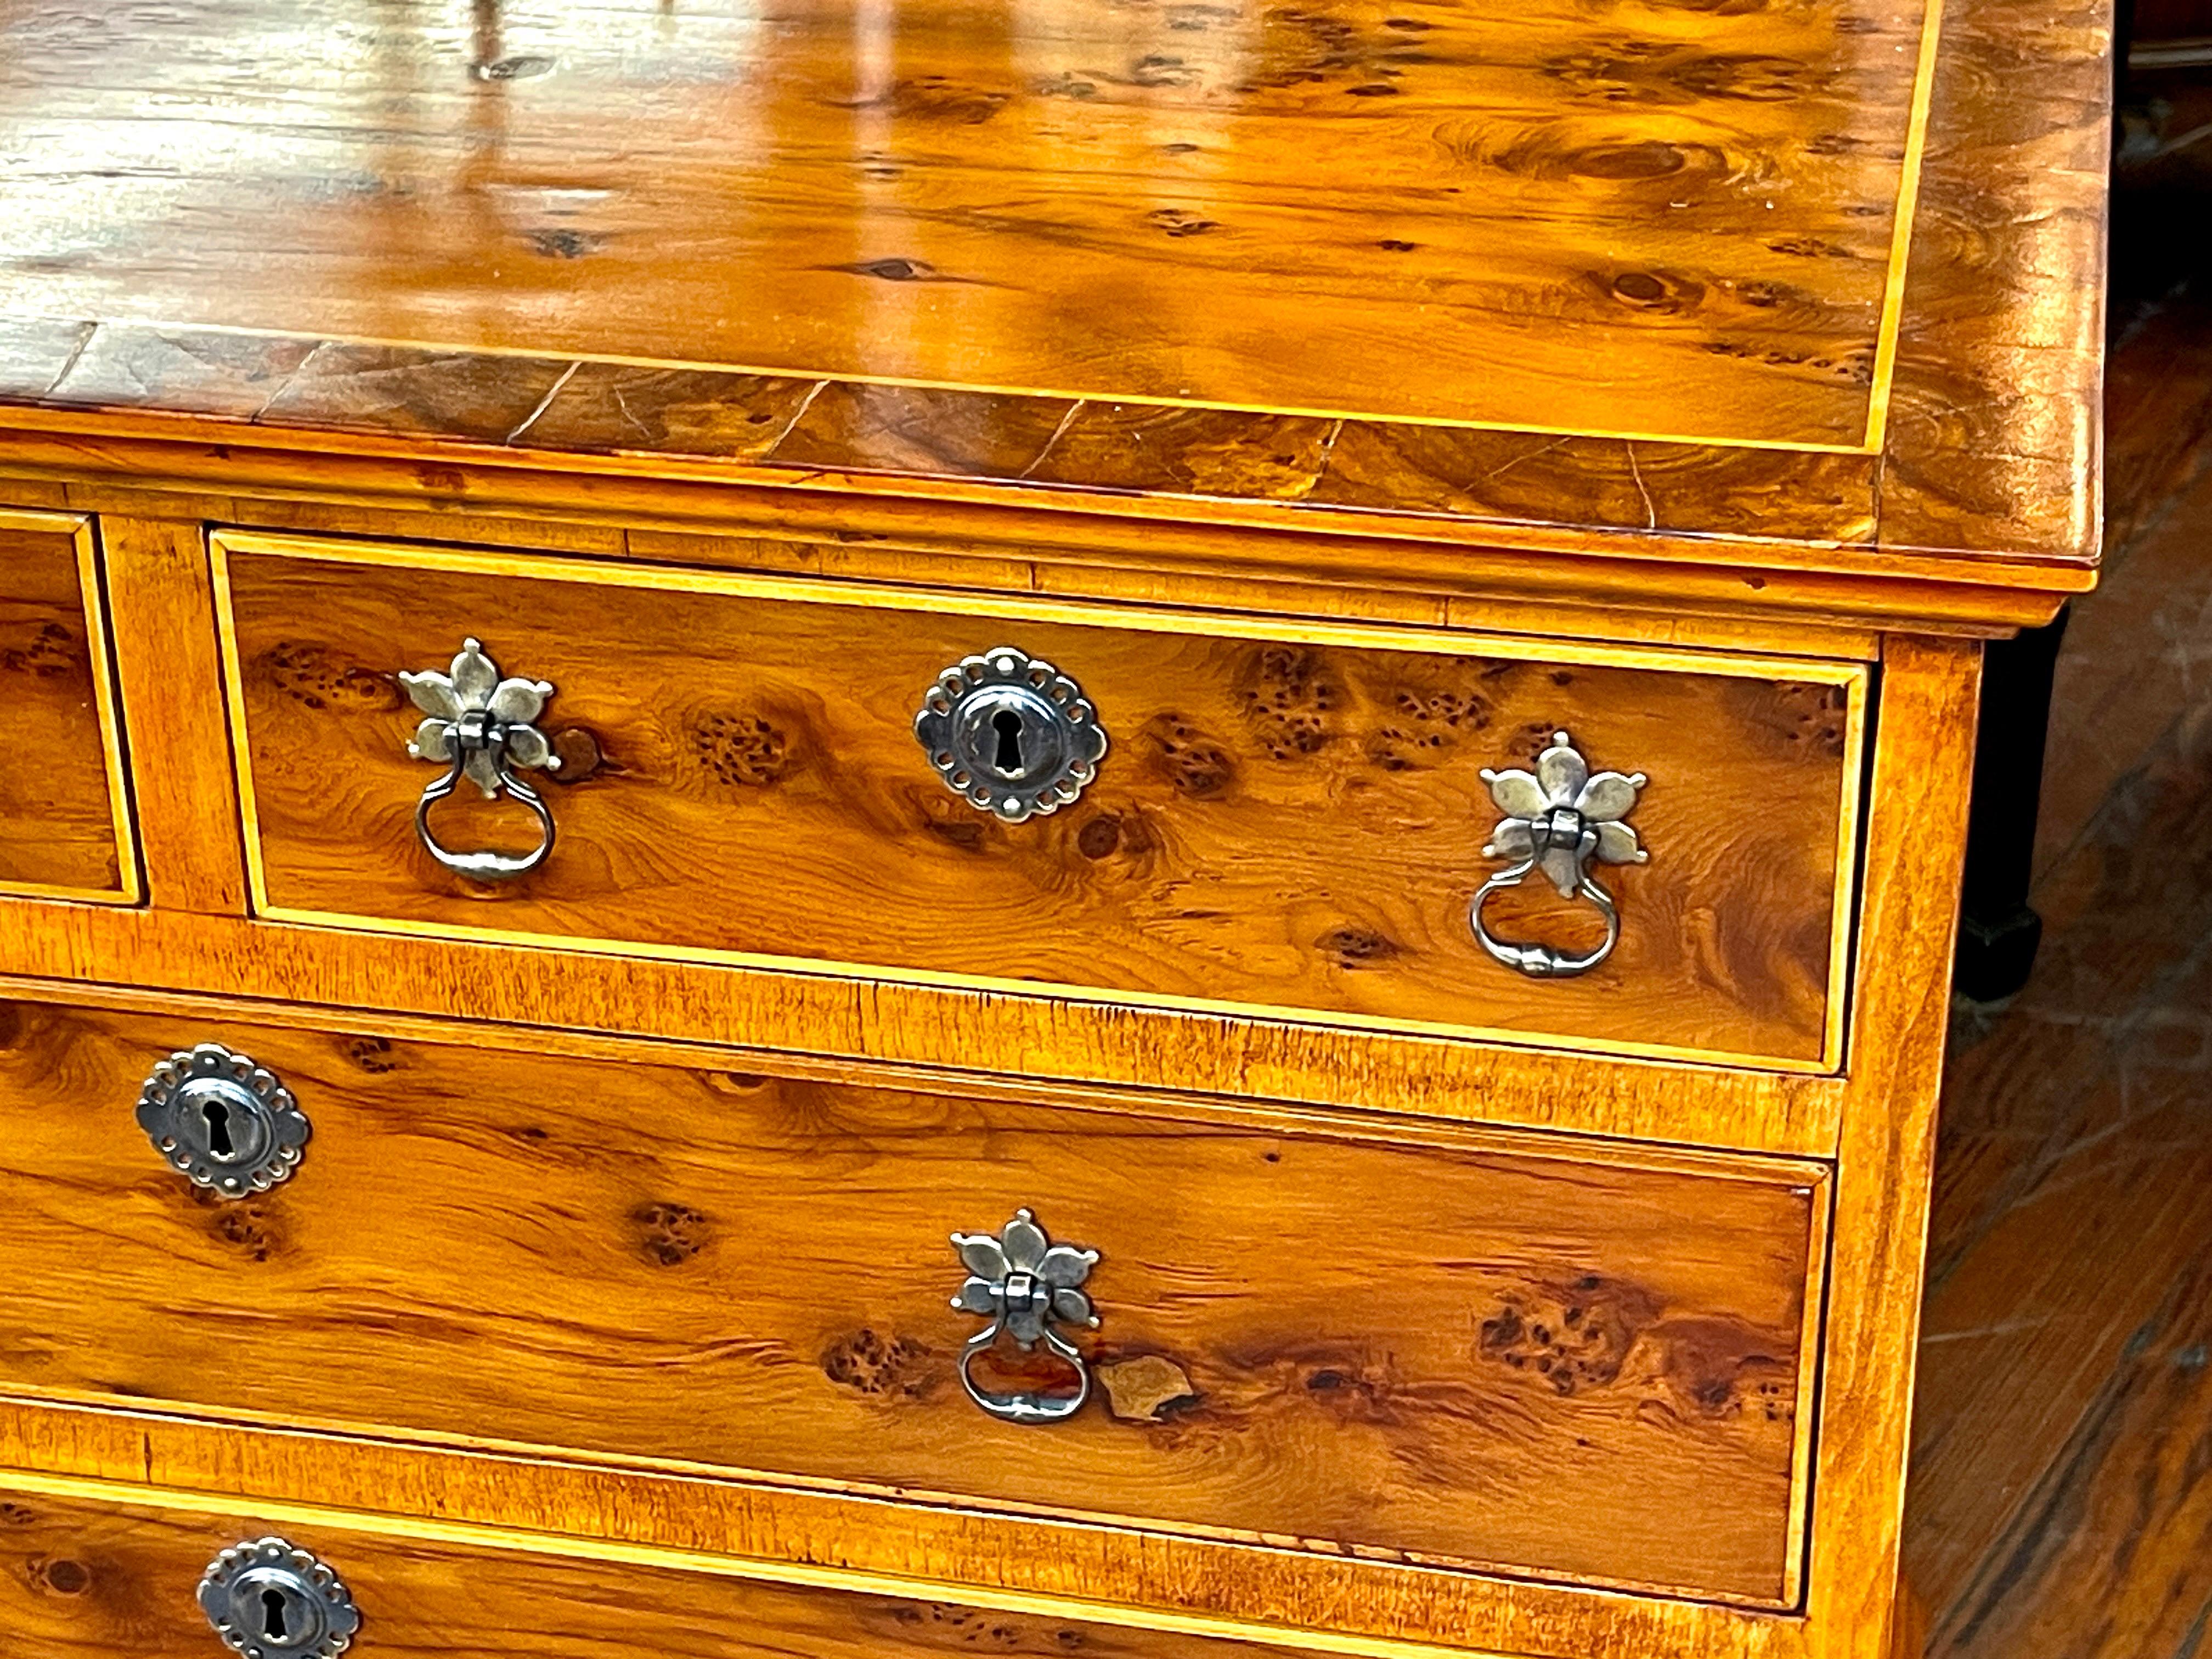 19th Century PAIR Extraordinary Antique English Inlaid Yew wood Q.A. style Bachelor's Chests